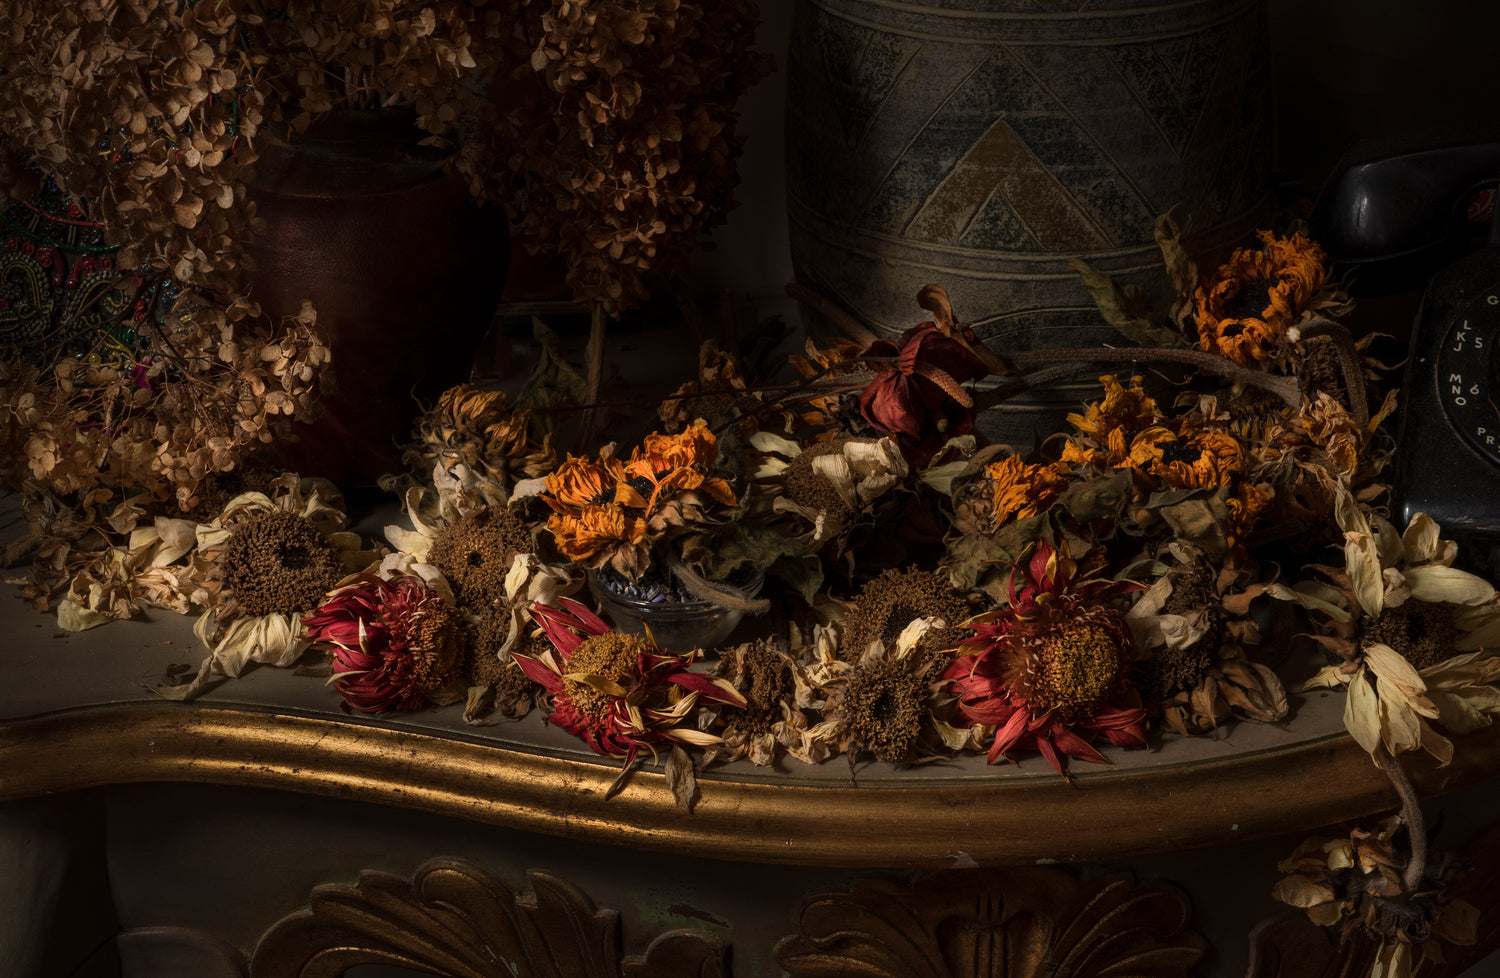 As a floral photographer I find beauty even when they are all dried up and slowly turning to dust.